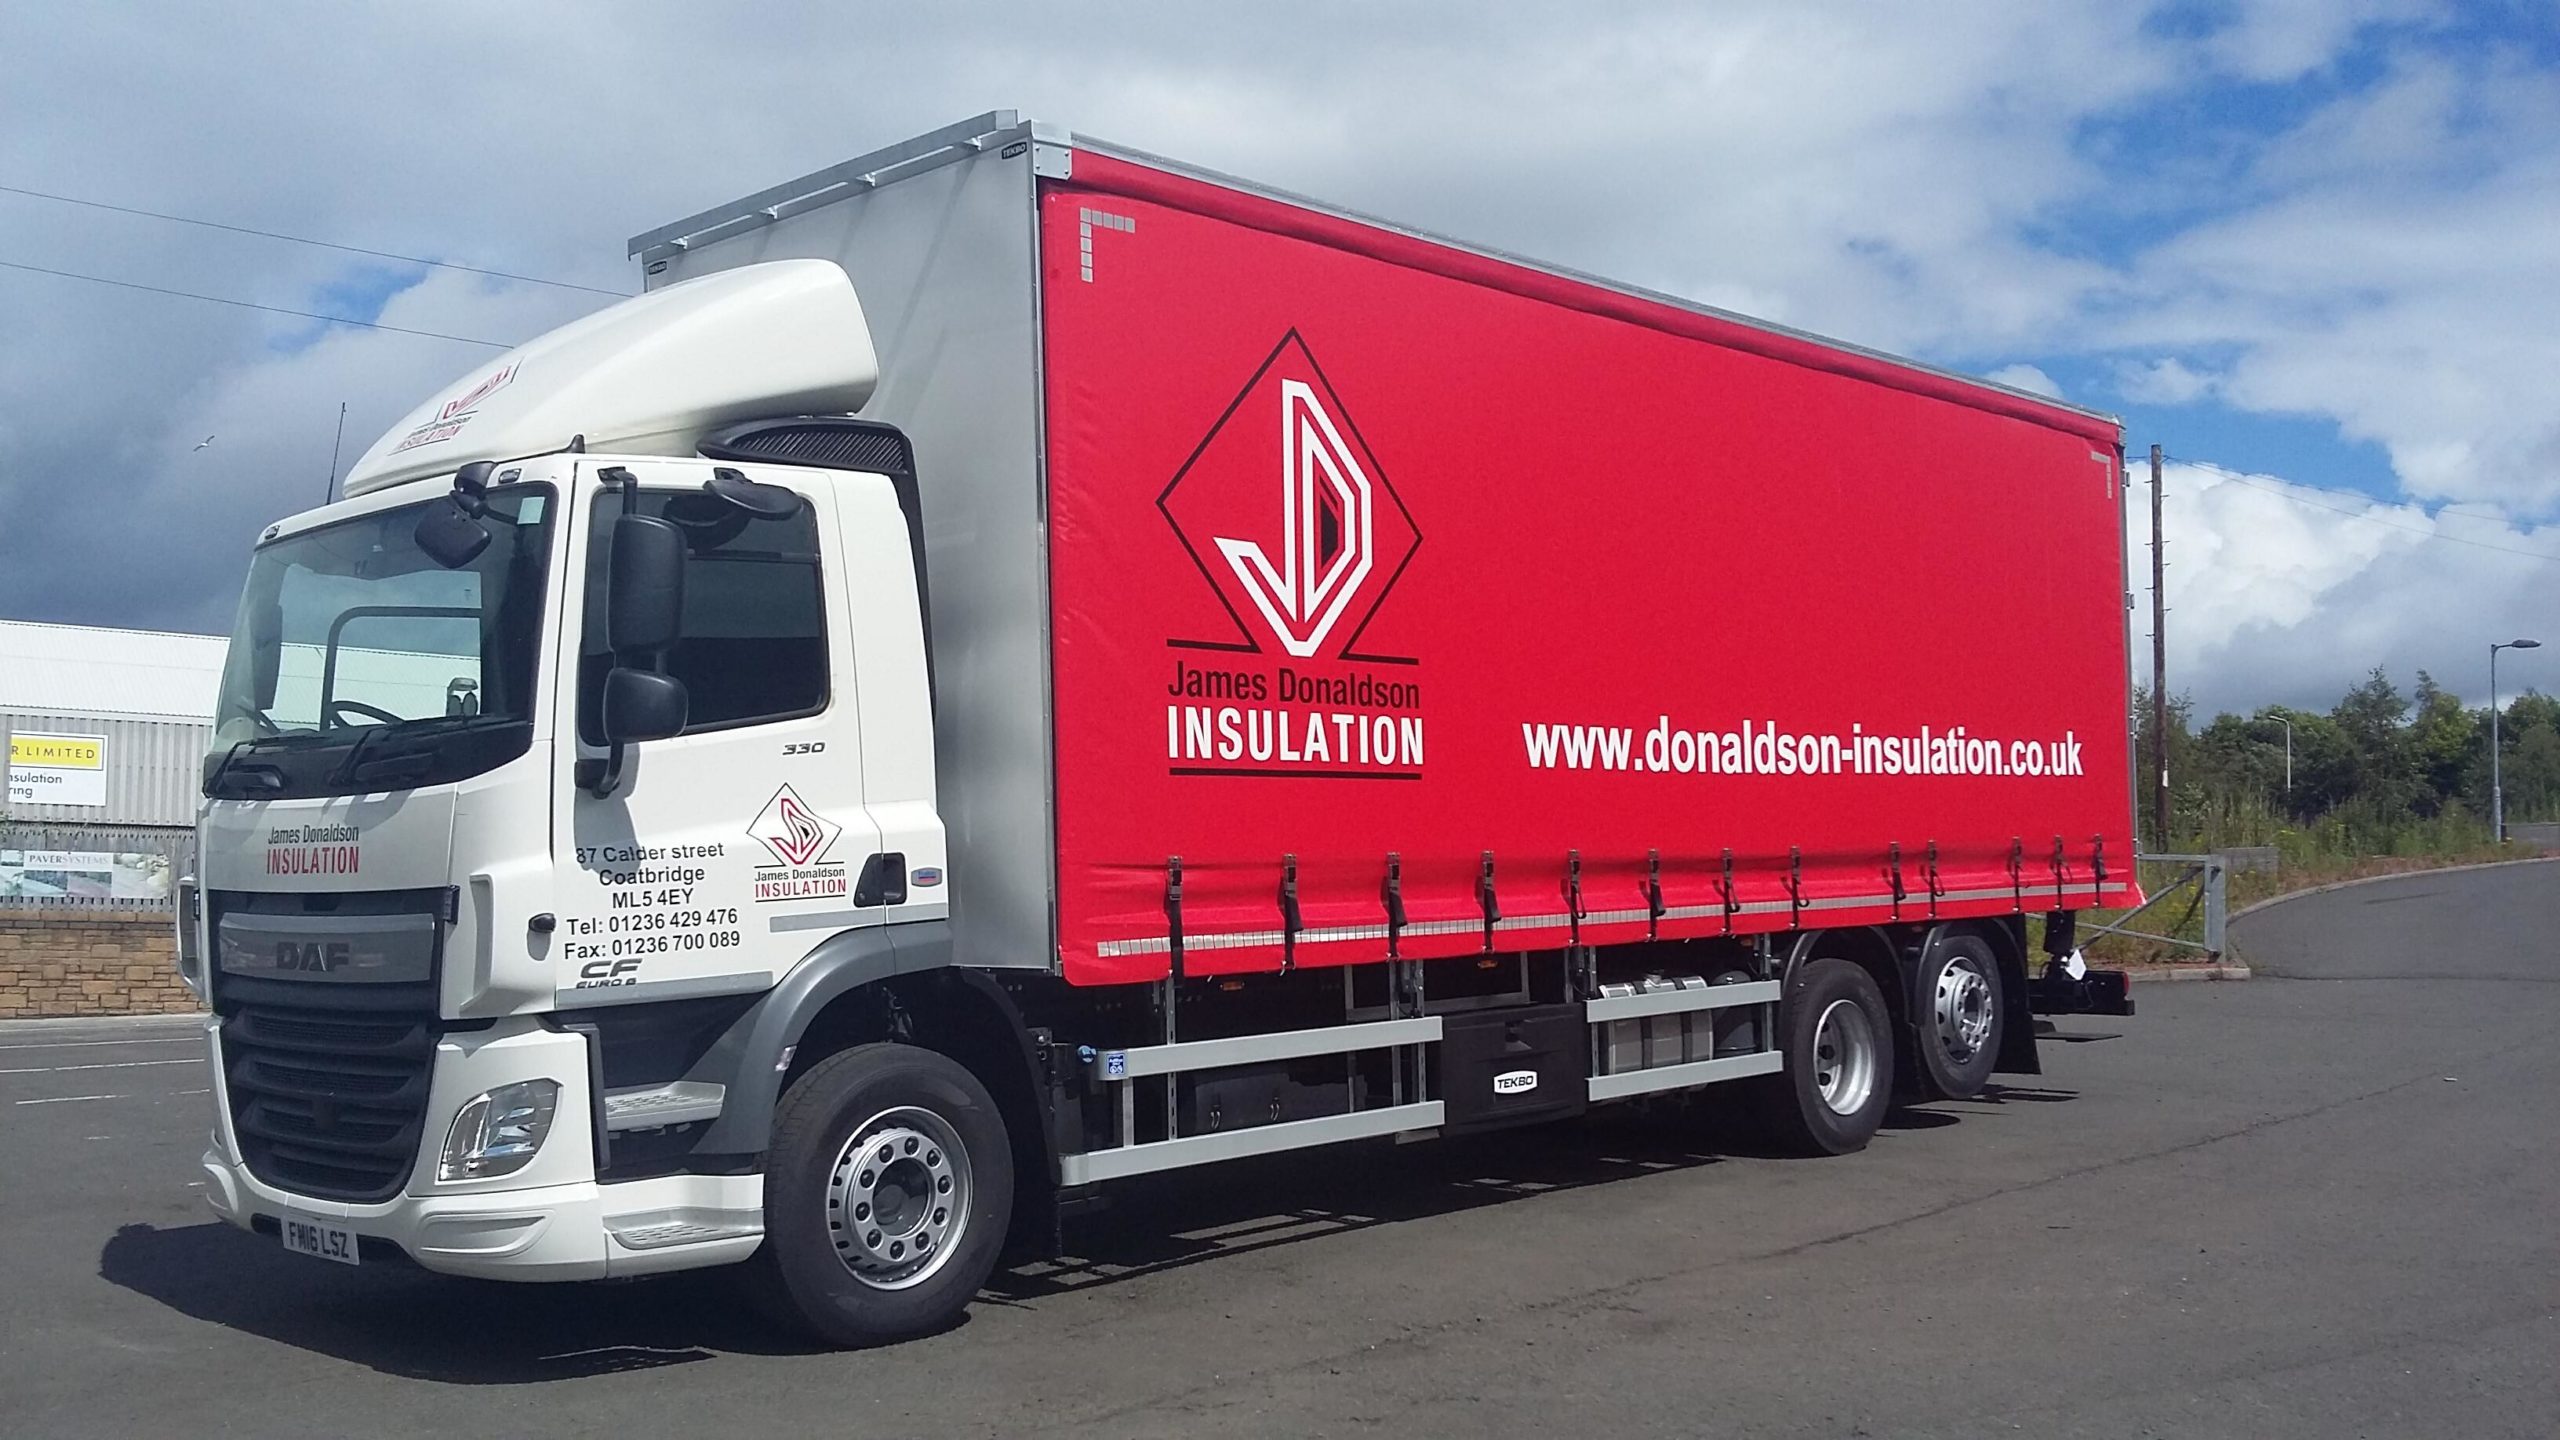 James Donaldson Insulation delivery lorry showcasing the brand imagery on it's side